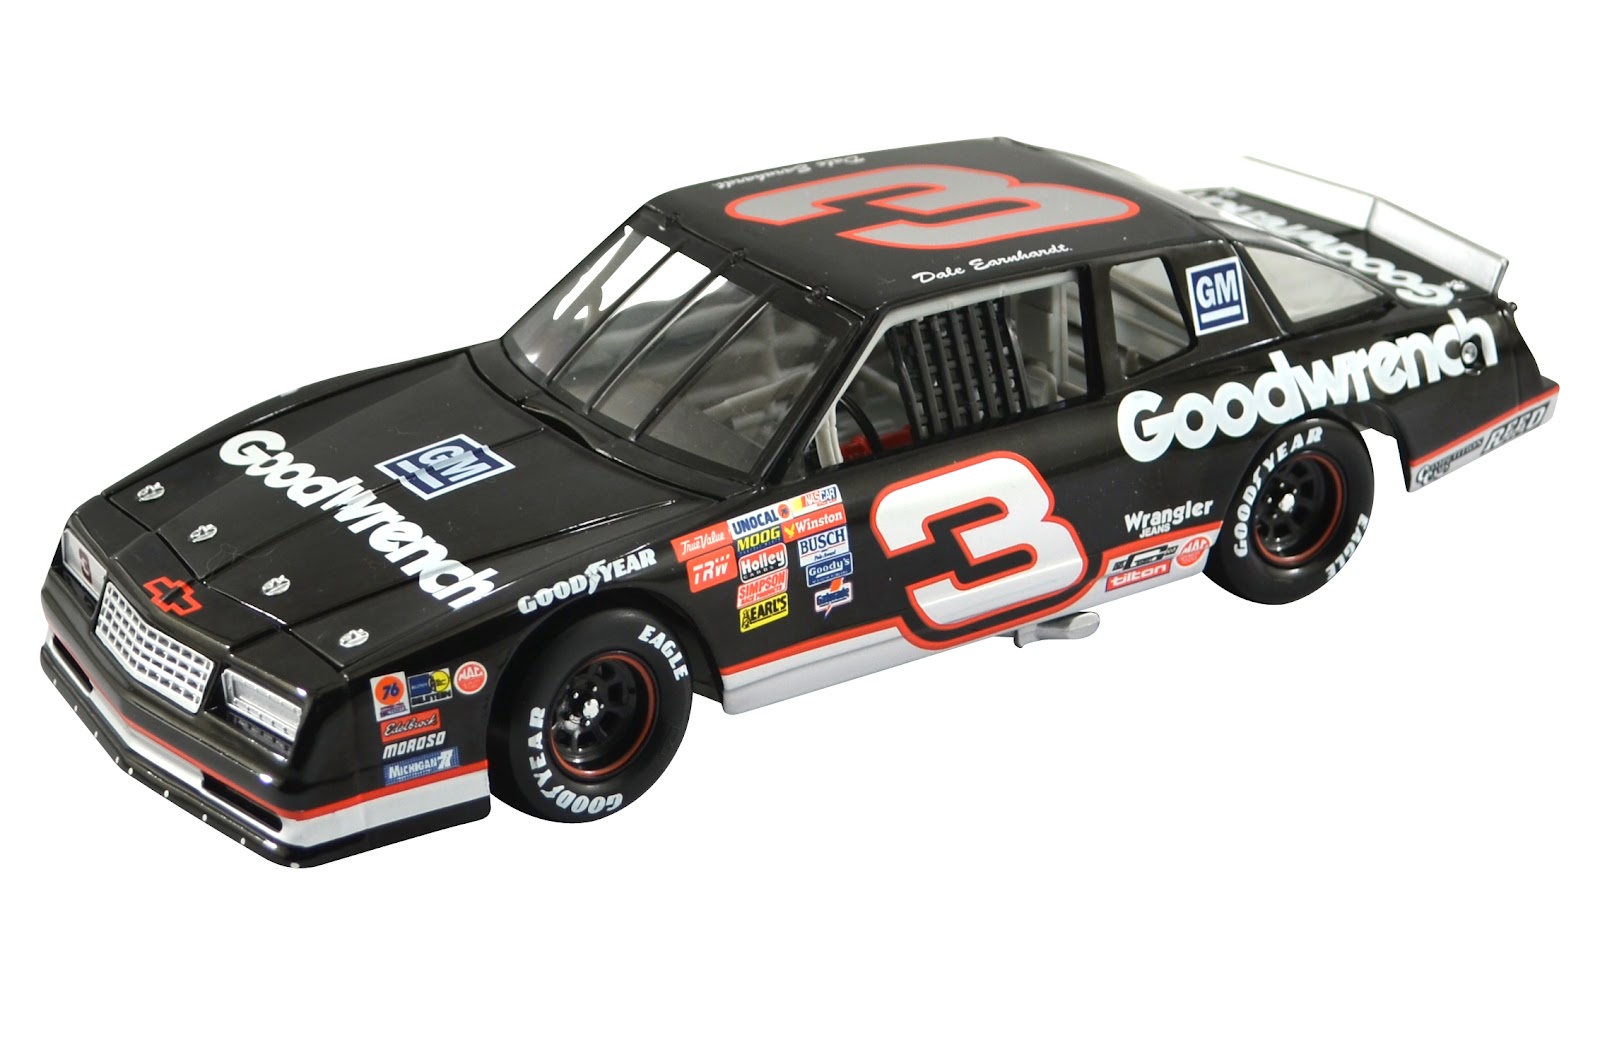 Skirts and Scuffs: Dale Earnhardt and the No. 3 Goodwrench Chevy